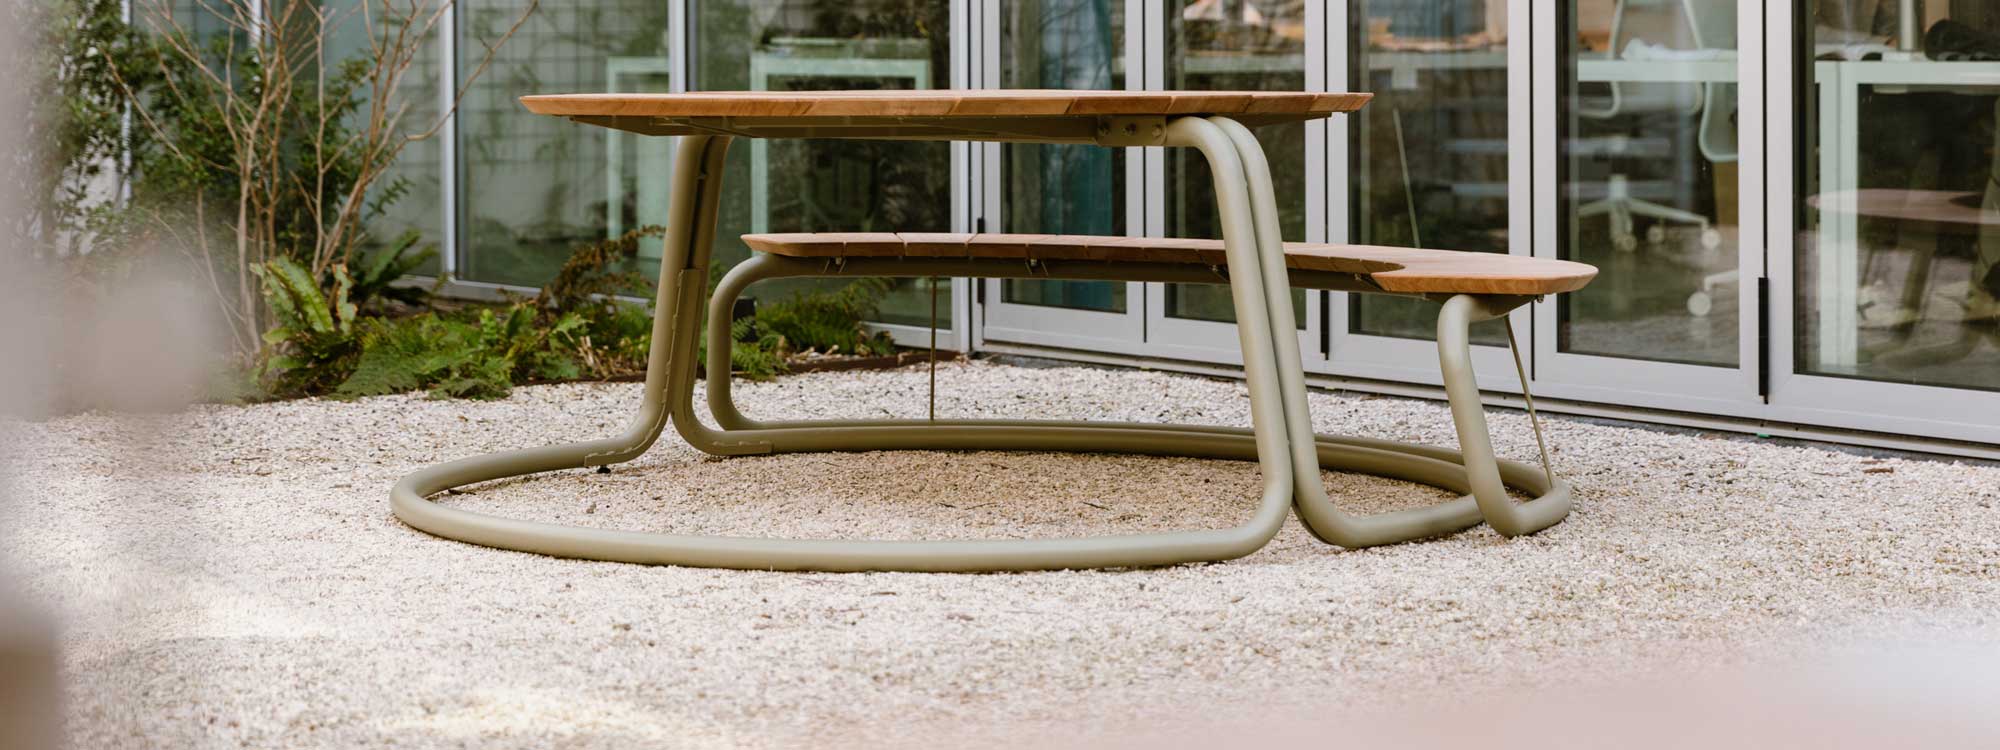 "The Circle" circular picnic table & benches is modern picnic furniture in luxury garden furniture materials by Wünder outdoor furniture.